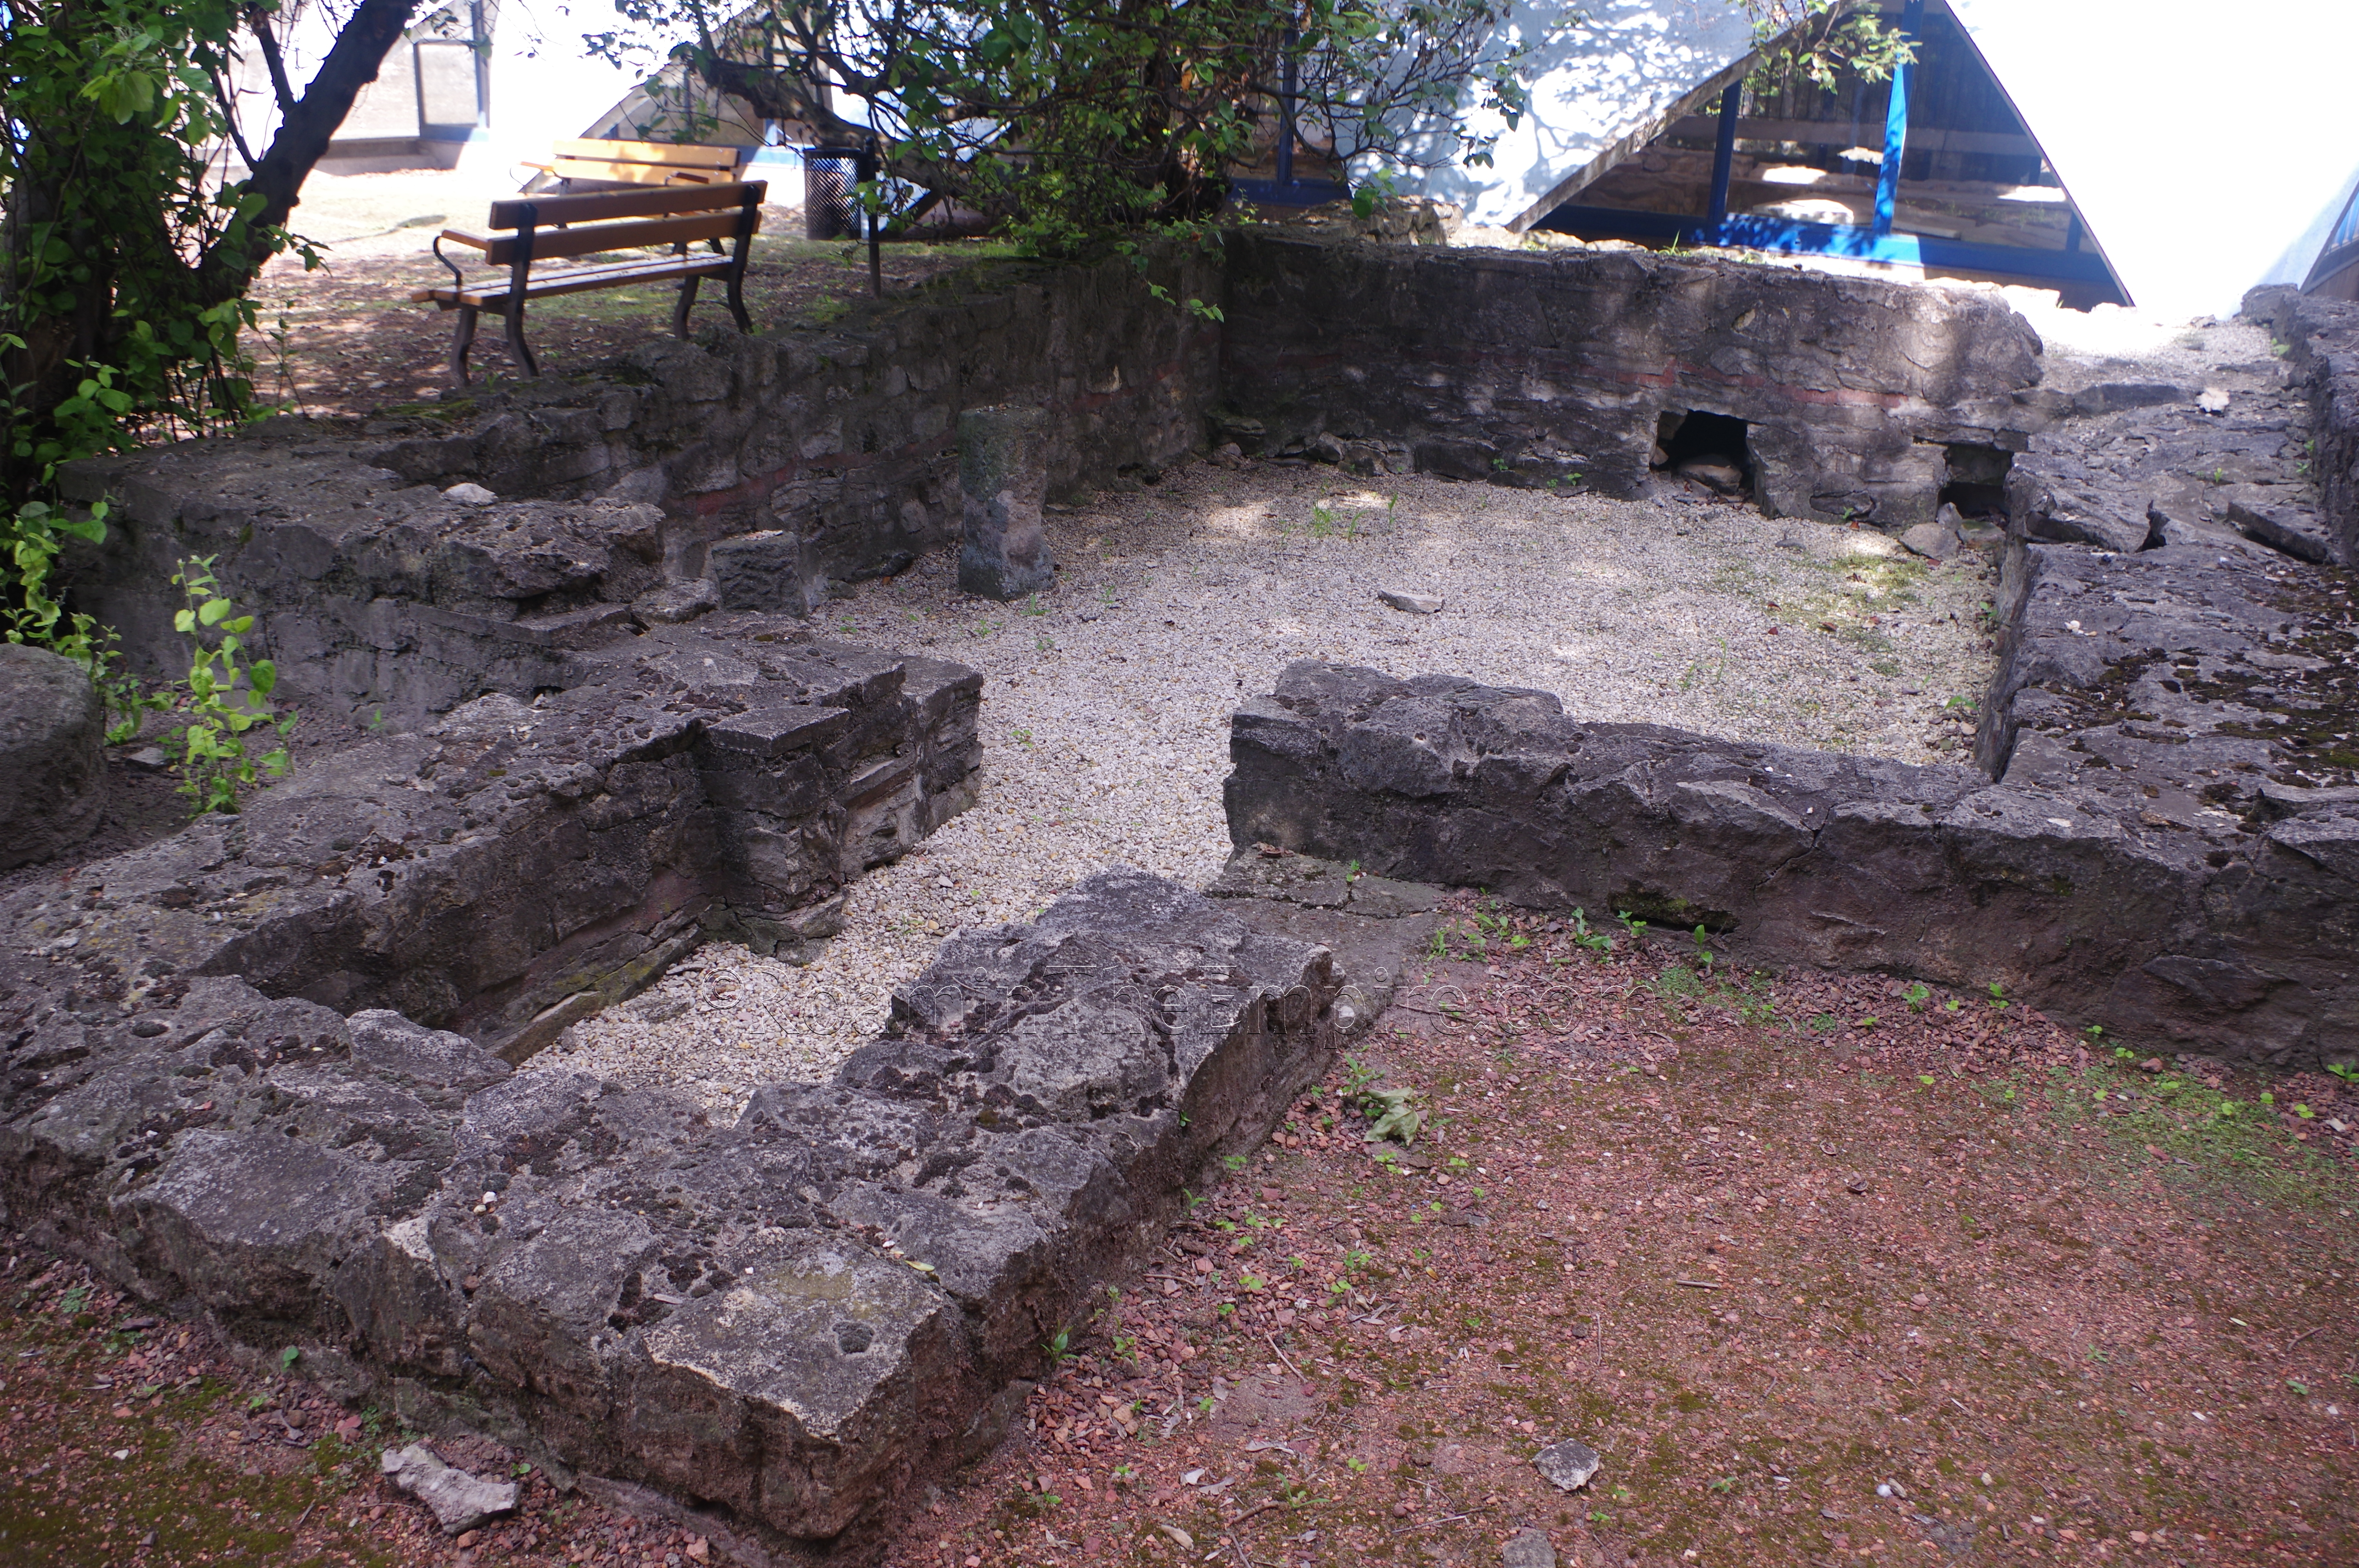 Room with hypocaust system adjacent to the mosaicked rooms of the Hercules Villa.